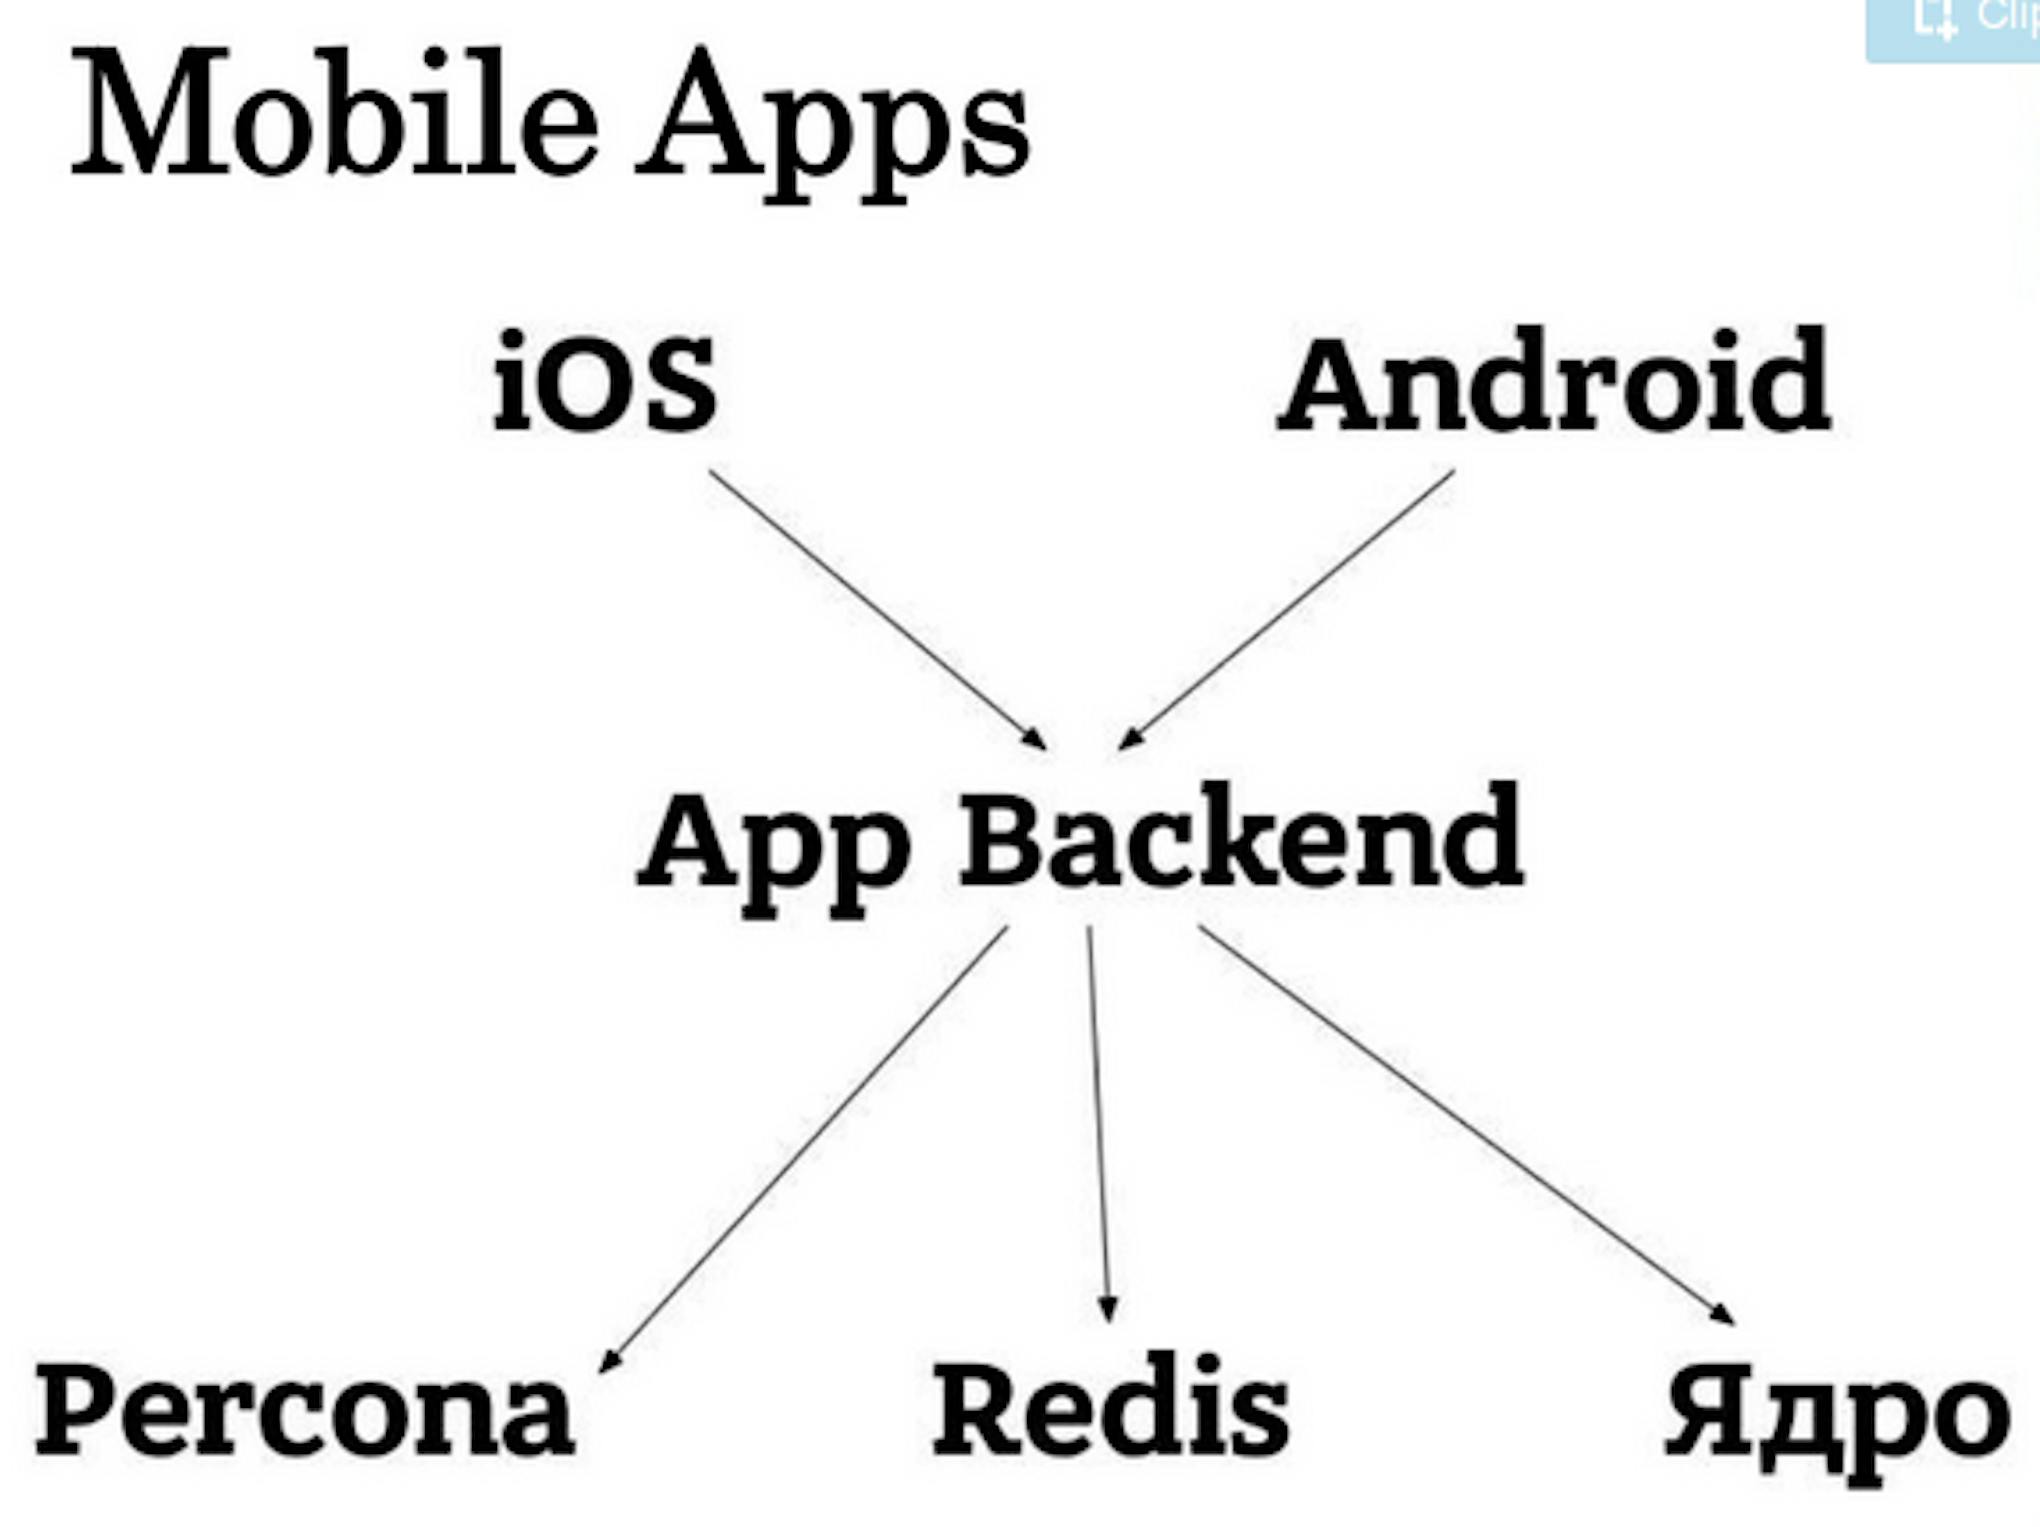 Taxi Services App Backend.